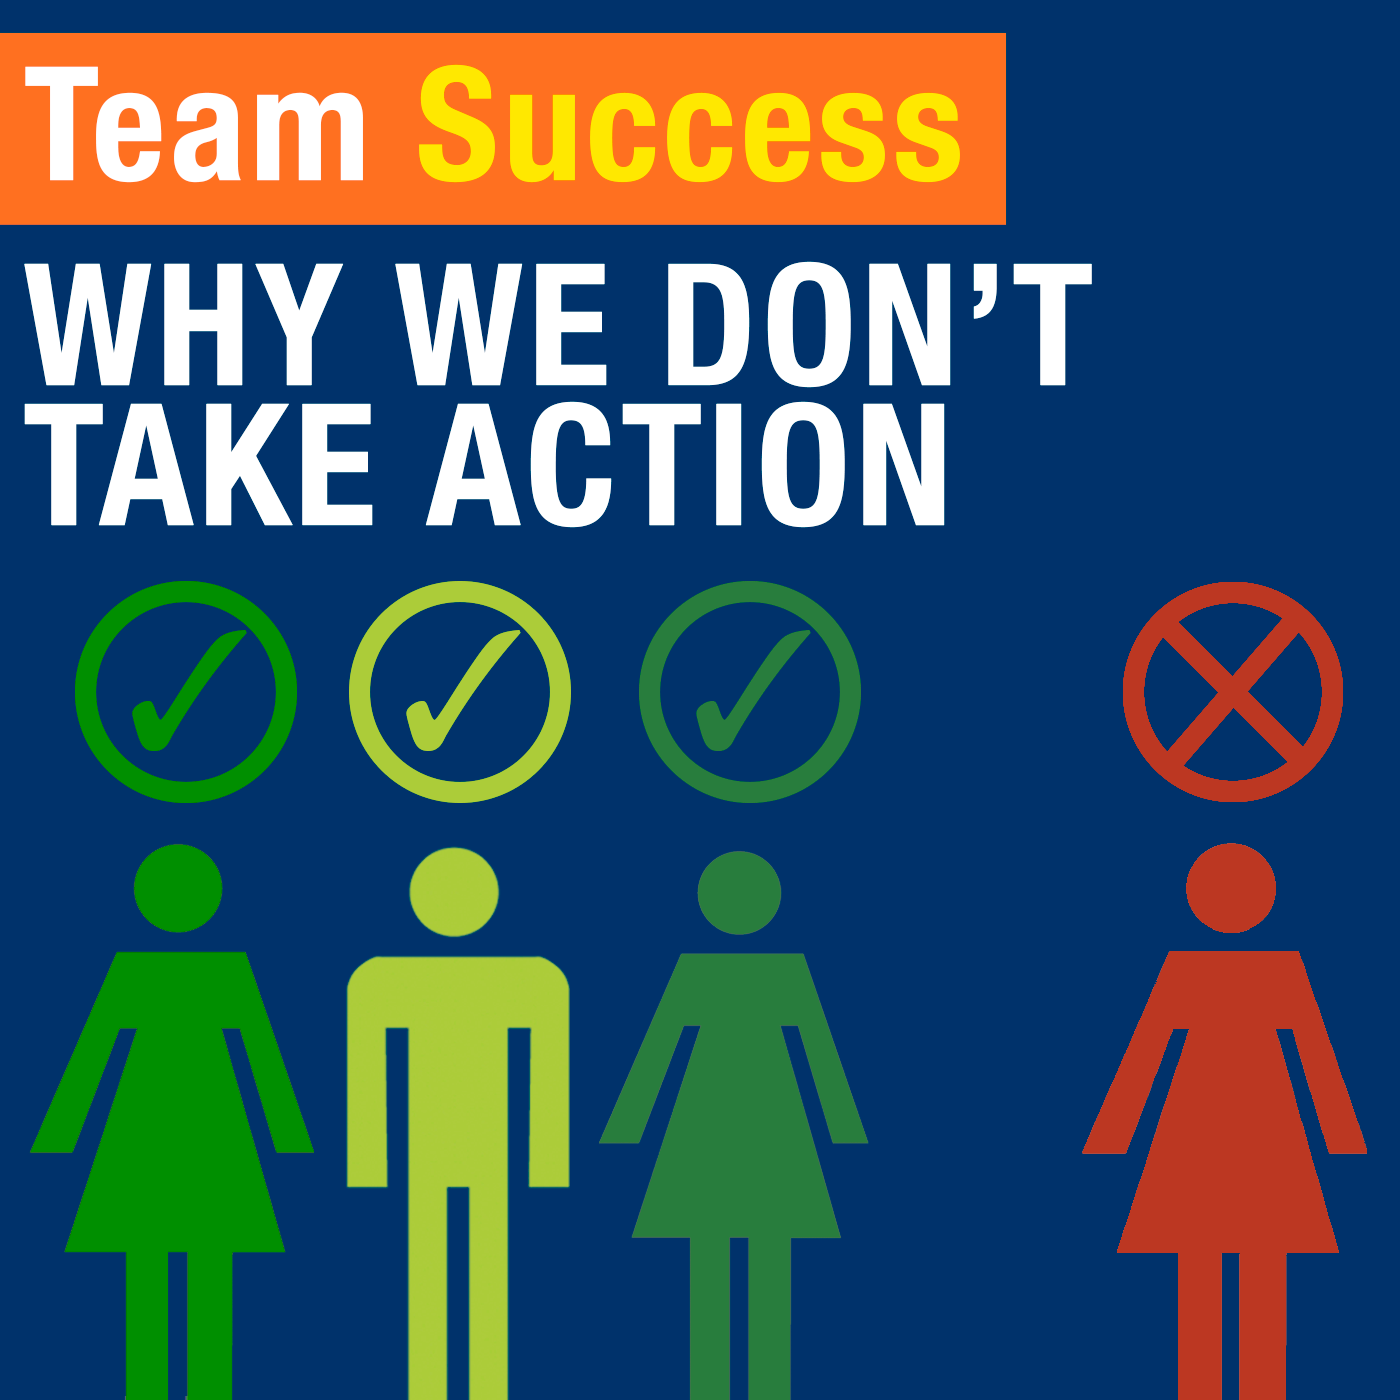 Why We Don't Take Action